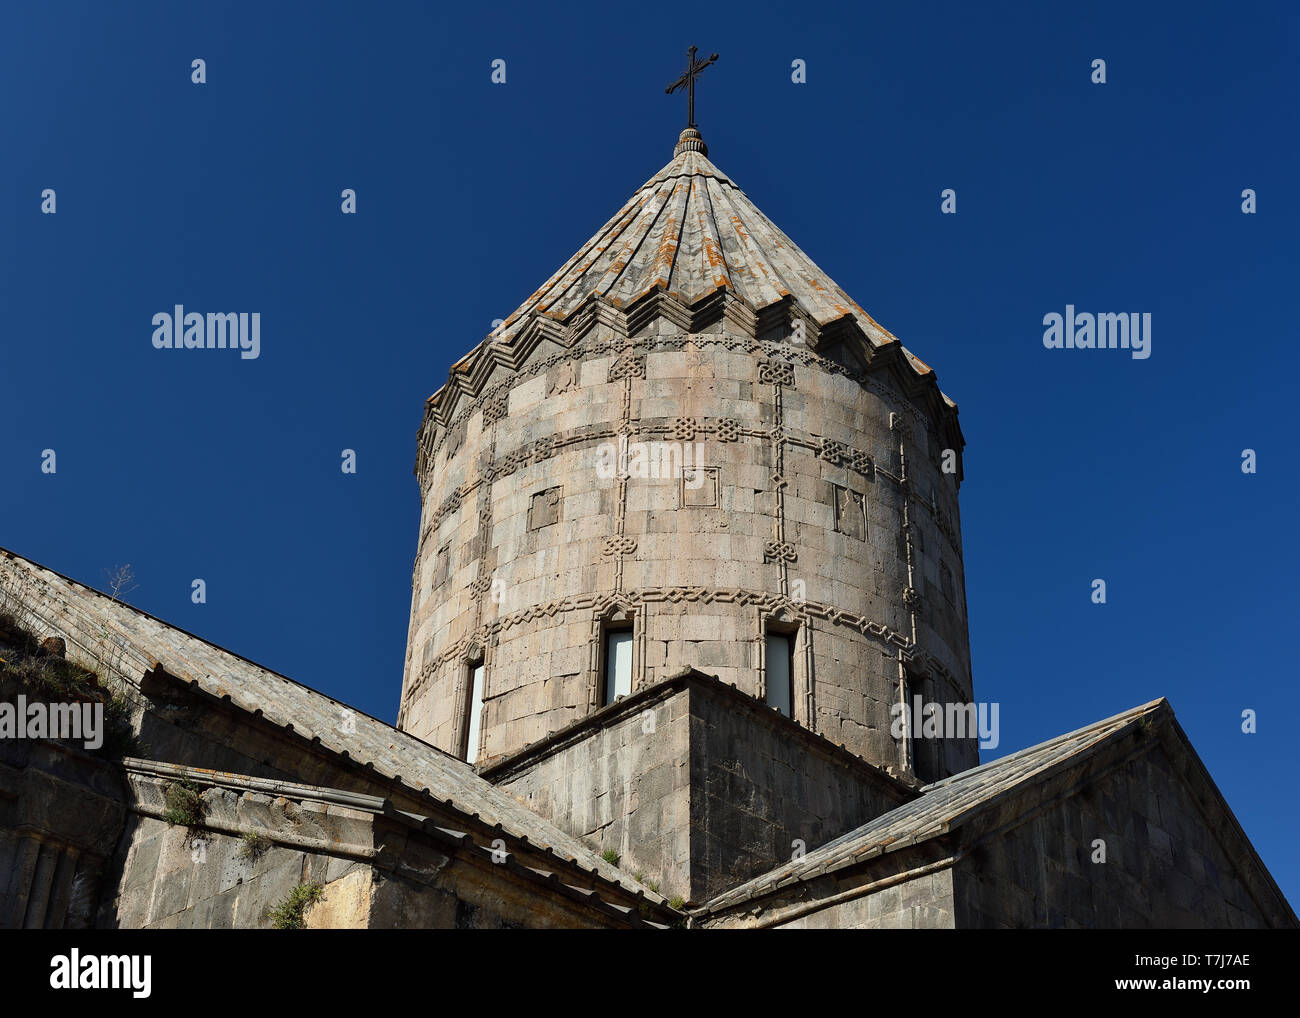 Detail of Tatev Monastery. It is one of the oldest and most famous monastery complexes in Armenia. Stock Photo